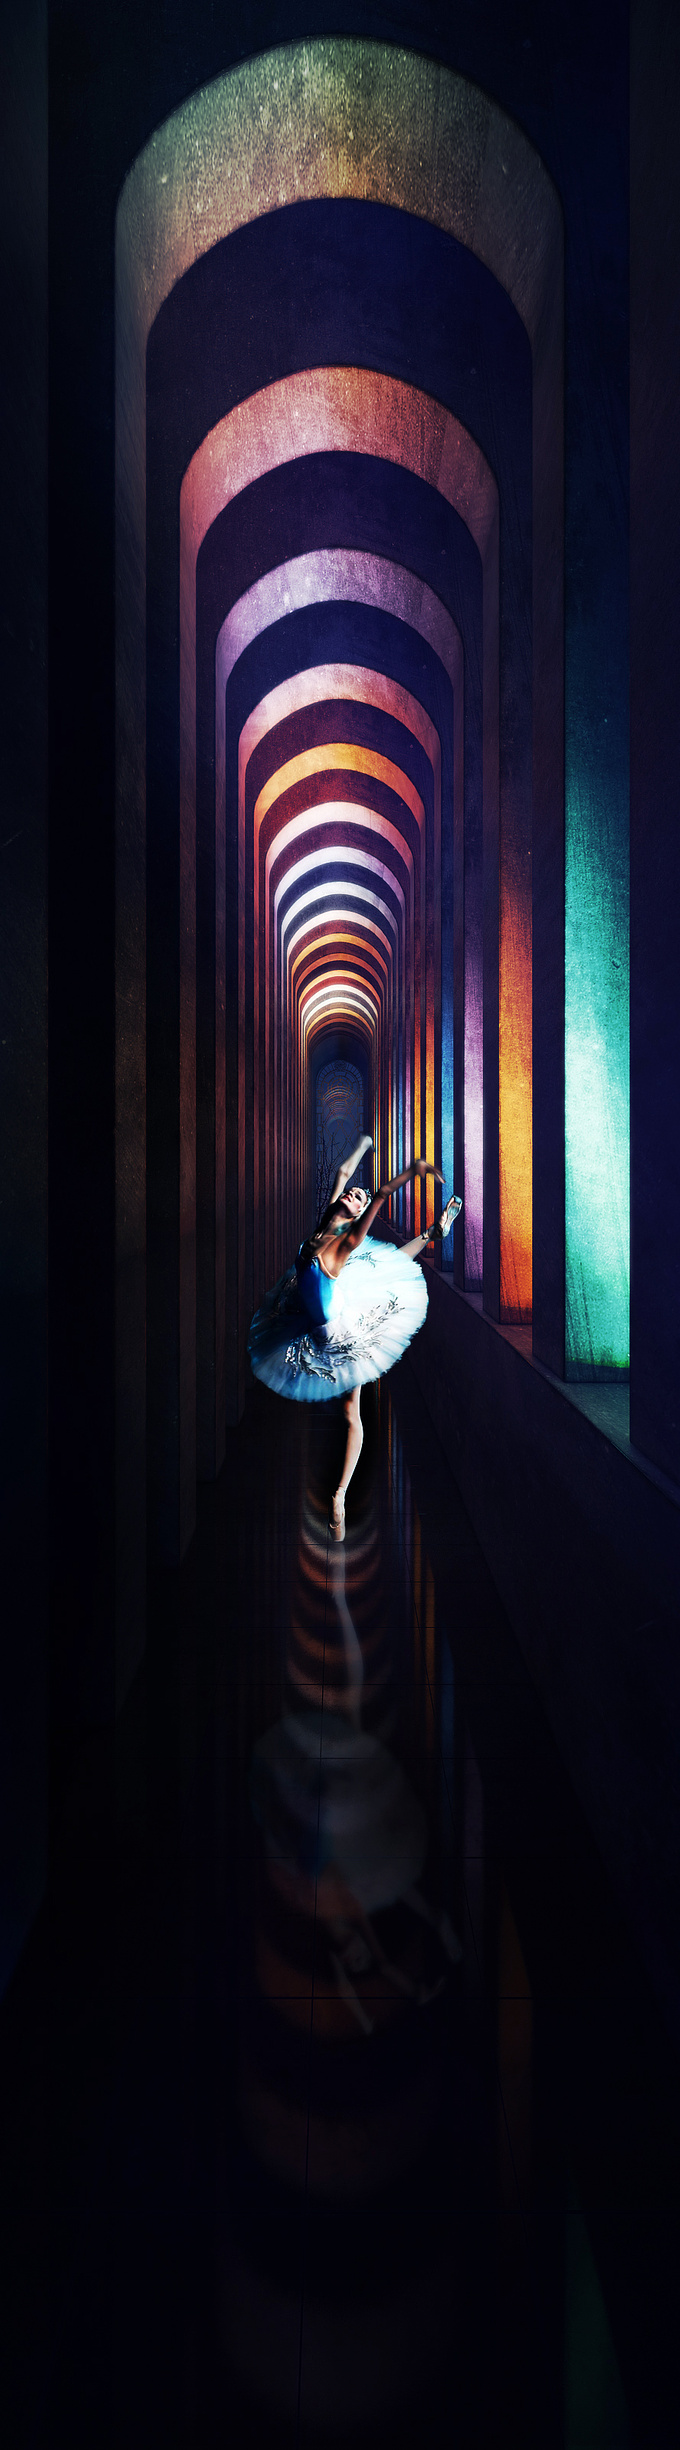 vicnguyendesign - http://vicnguyendesign.org/portfolio
Dancing!!!
SW: 3dmax and PS
By: VicnguyenDesign
Thanks all C & C.